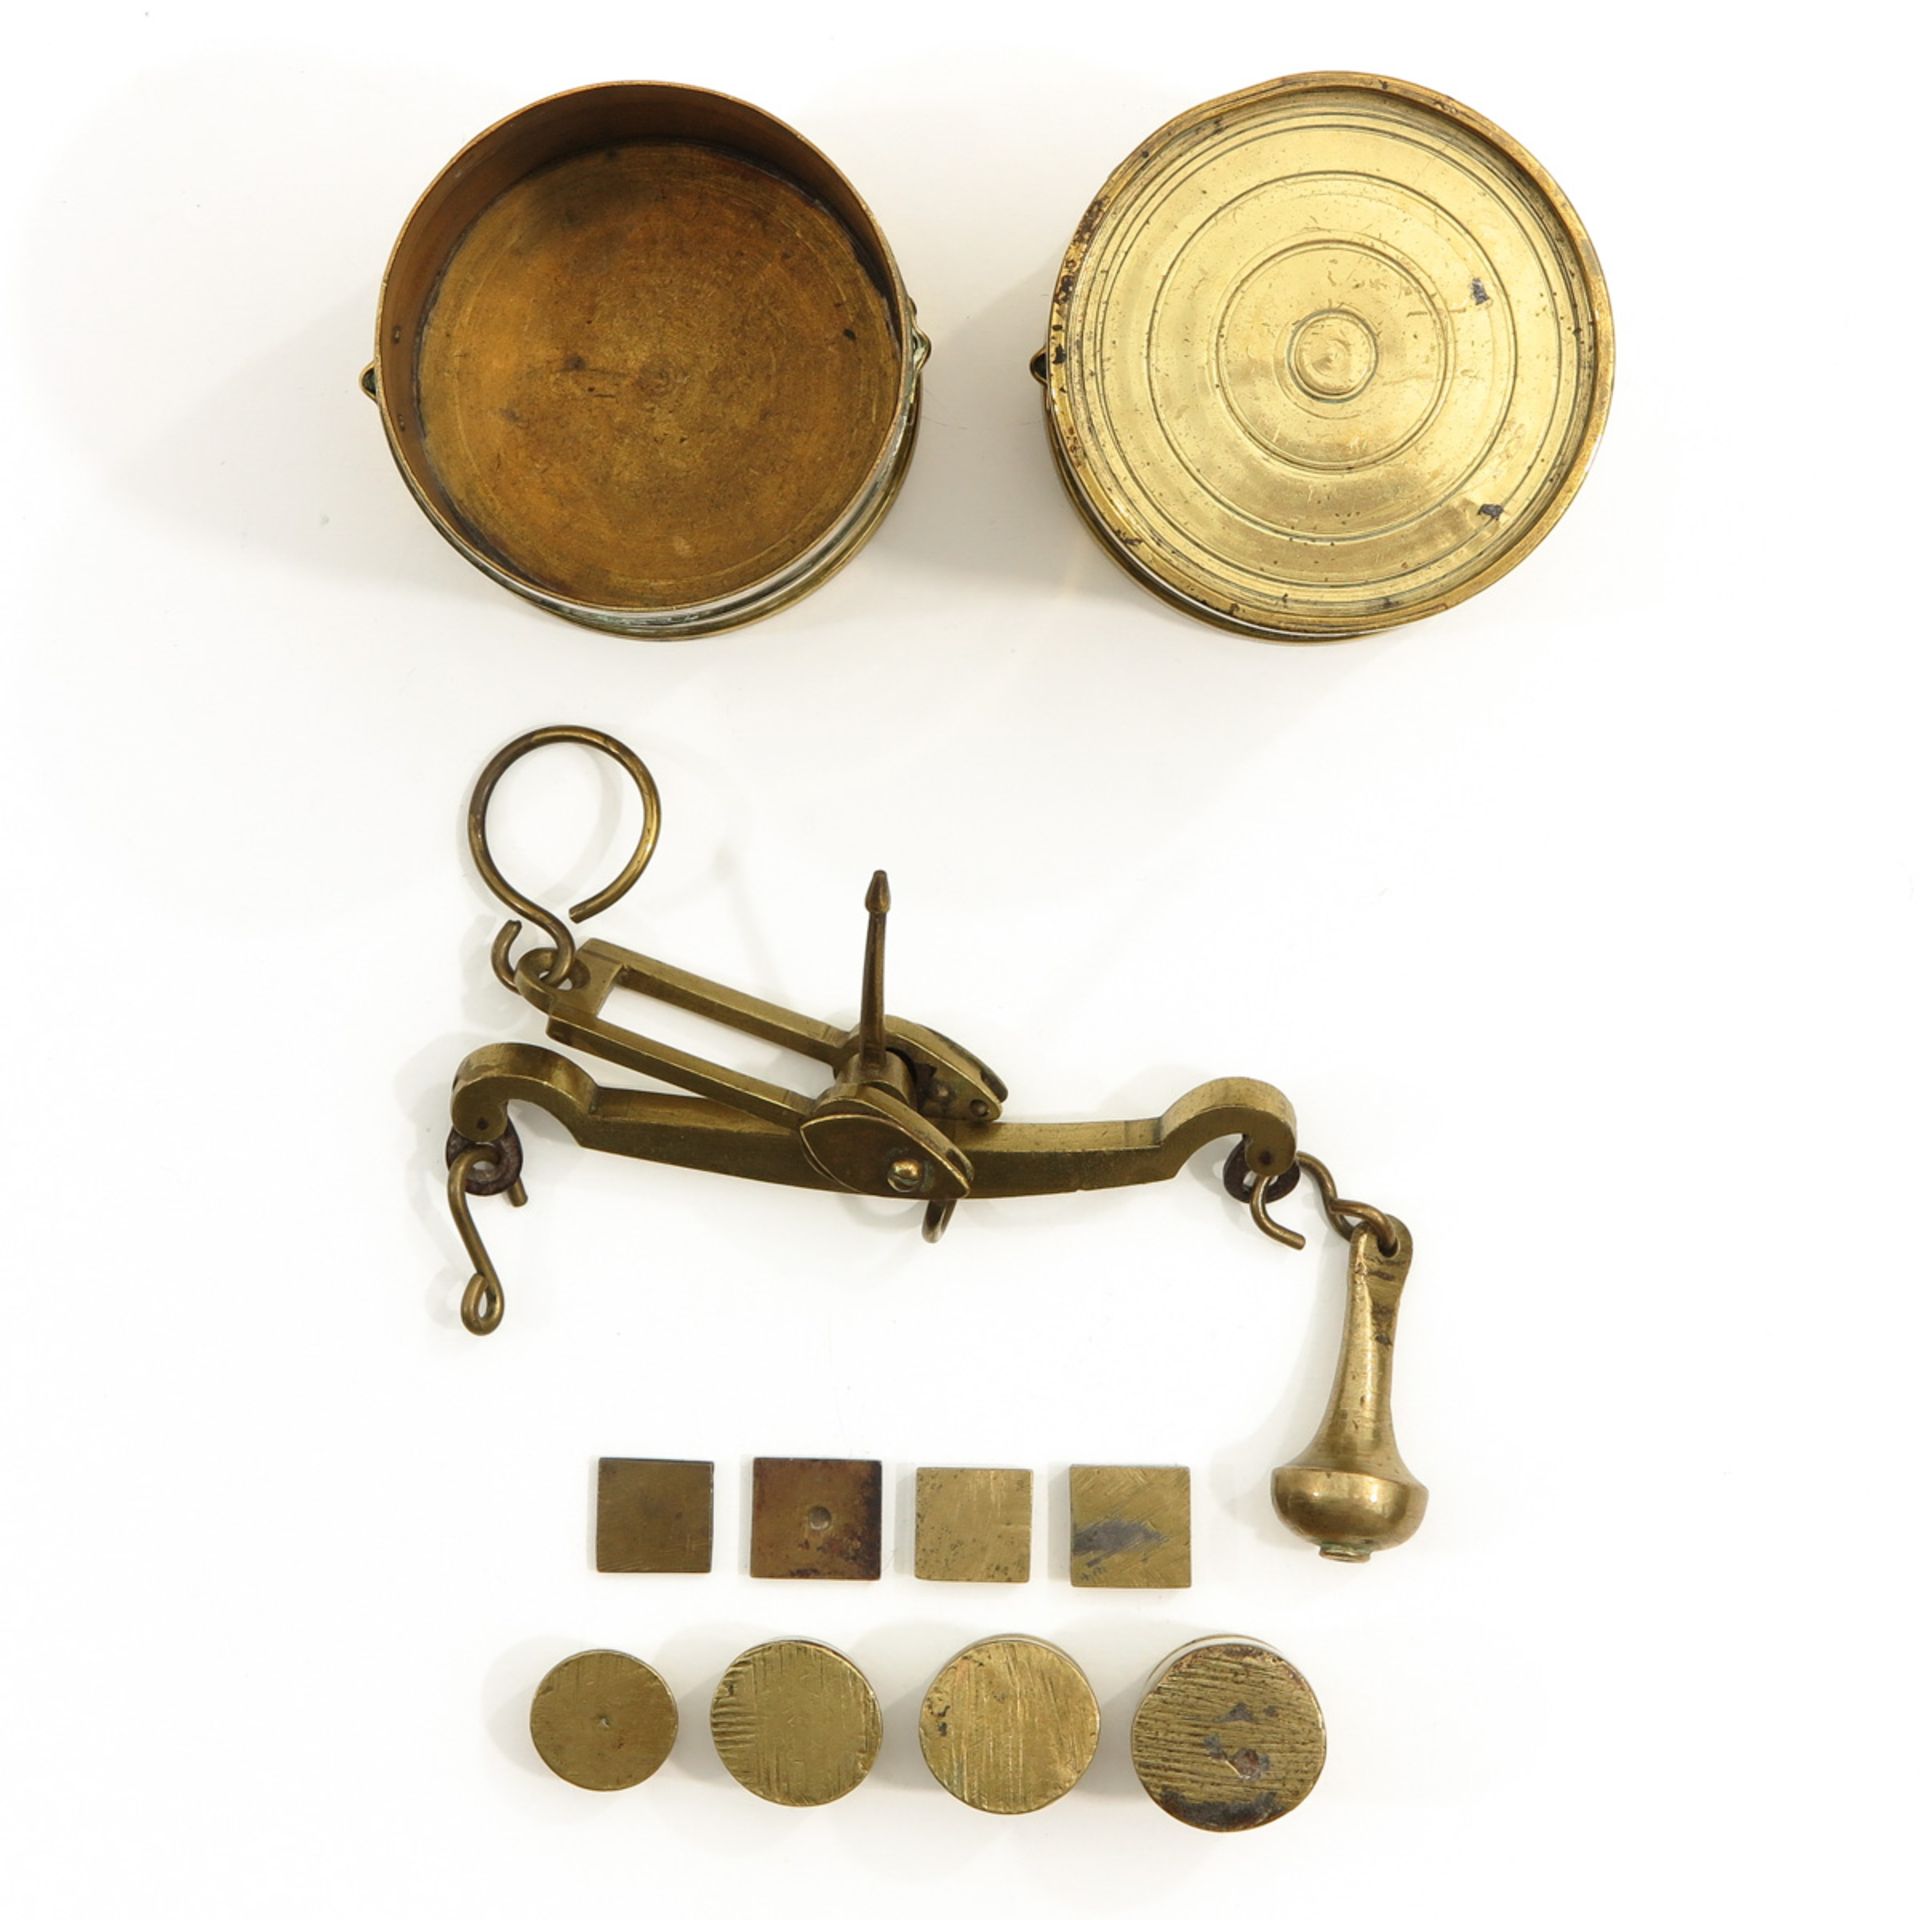 An 18th Century Yellow Copper Travel Scale - Image 3 of 7